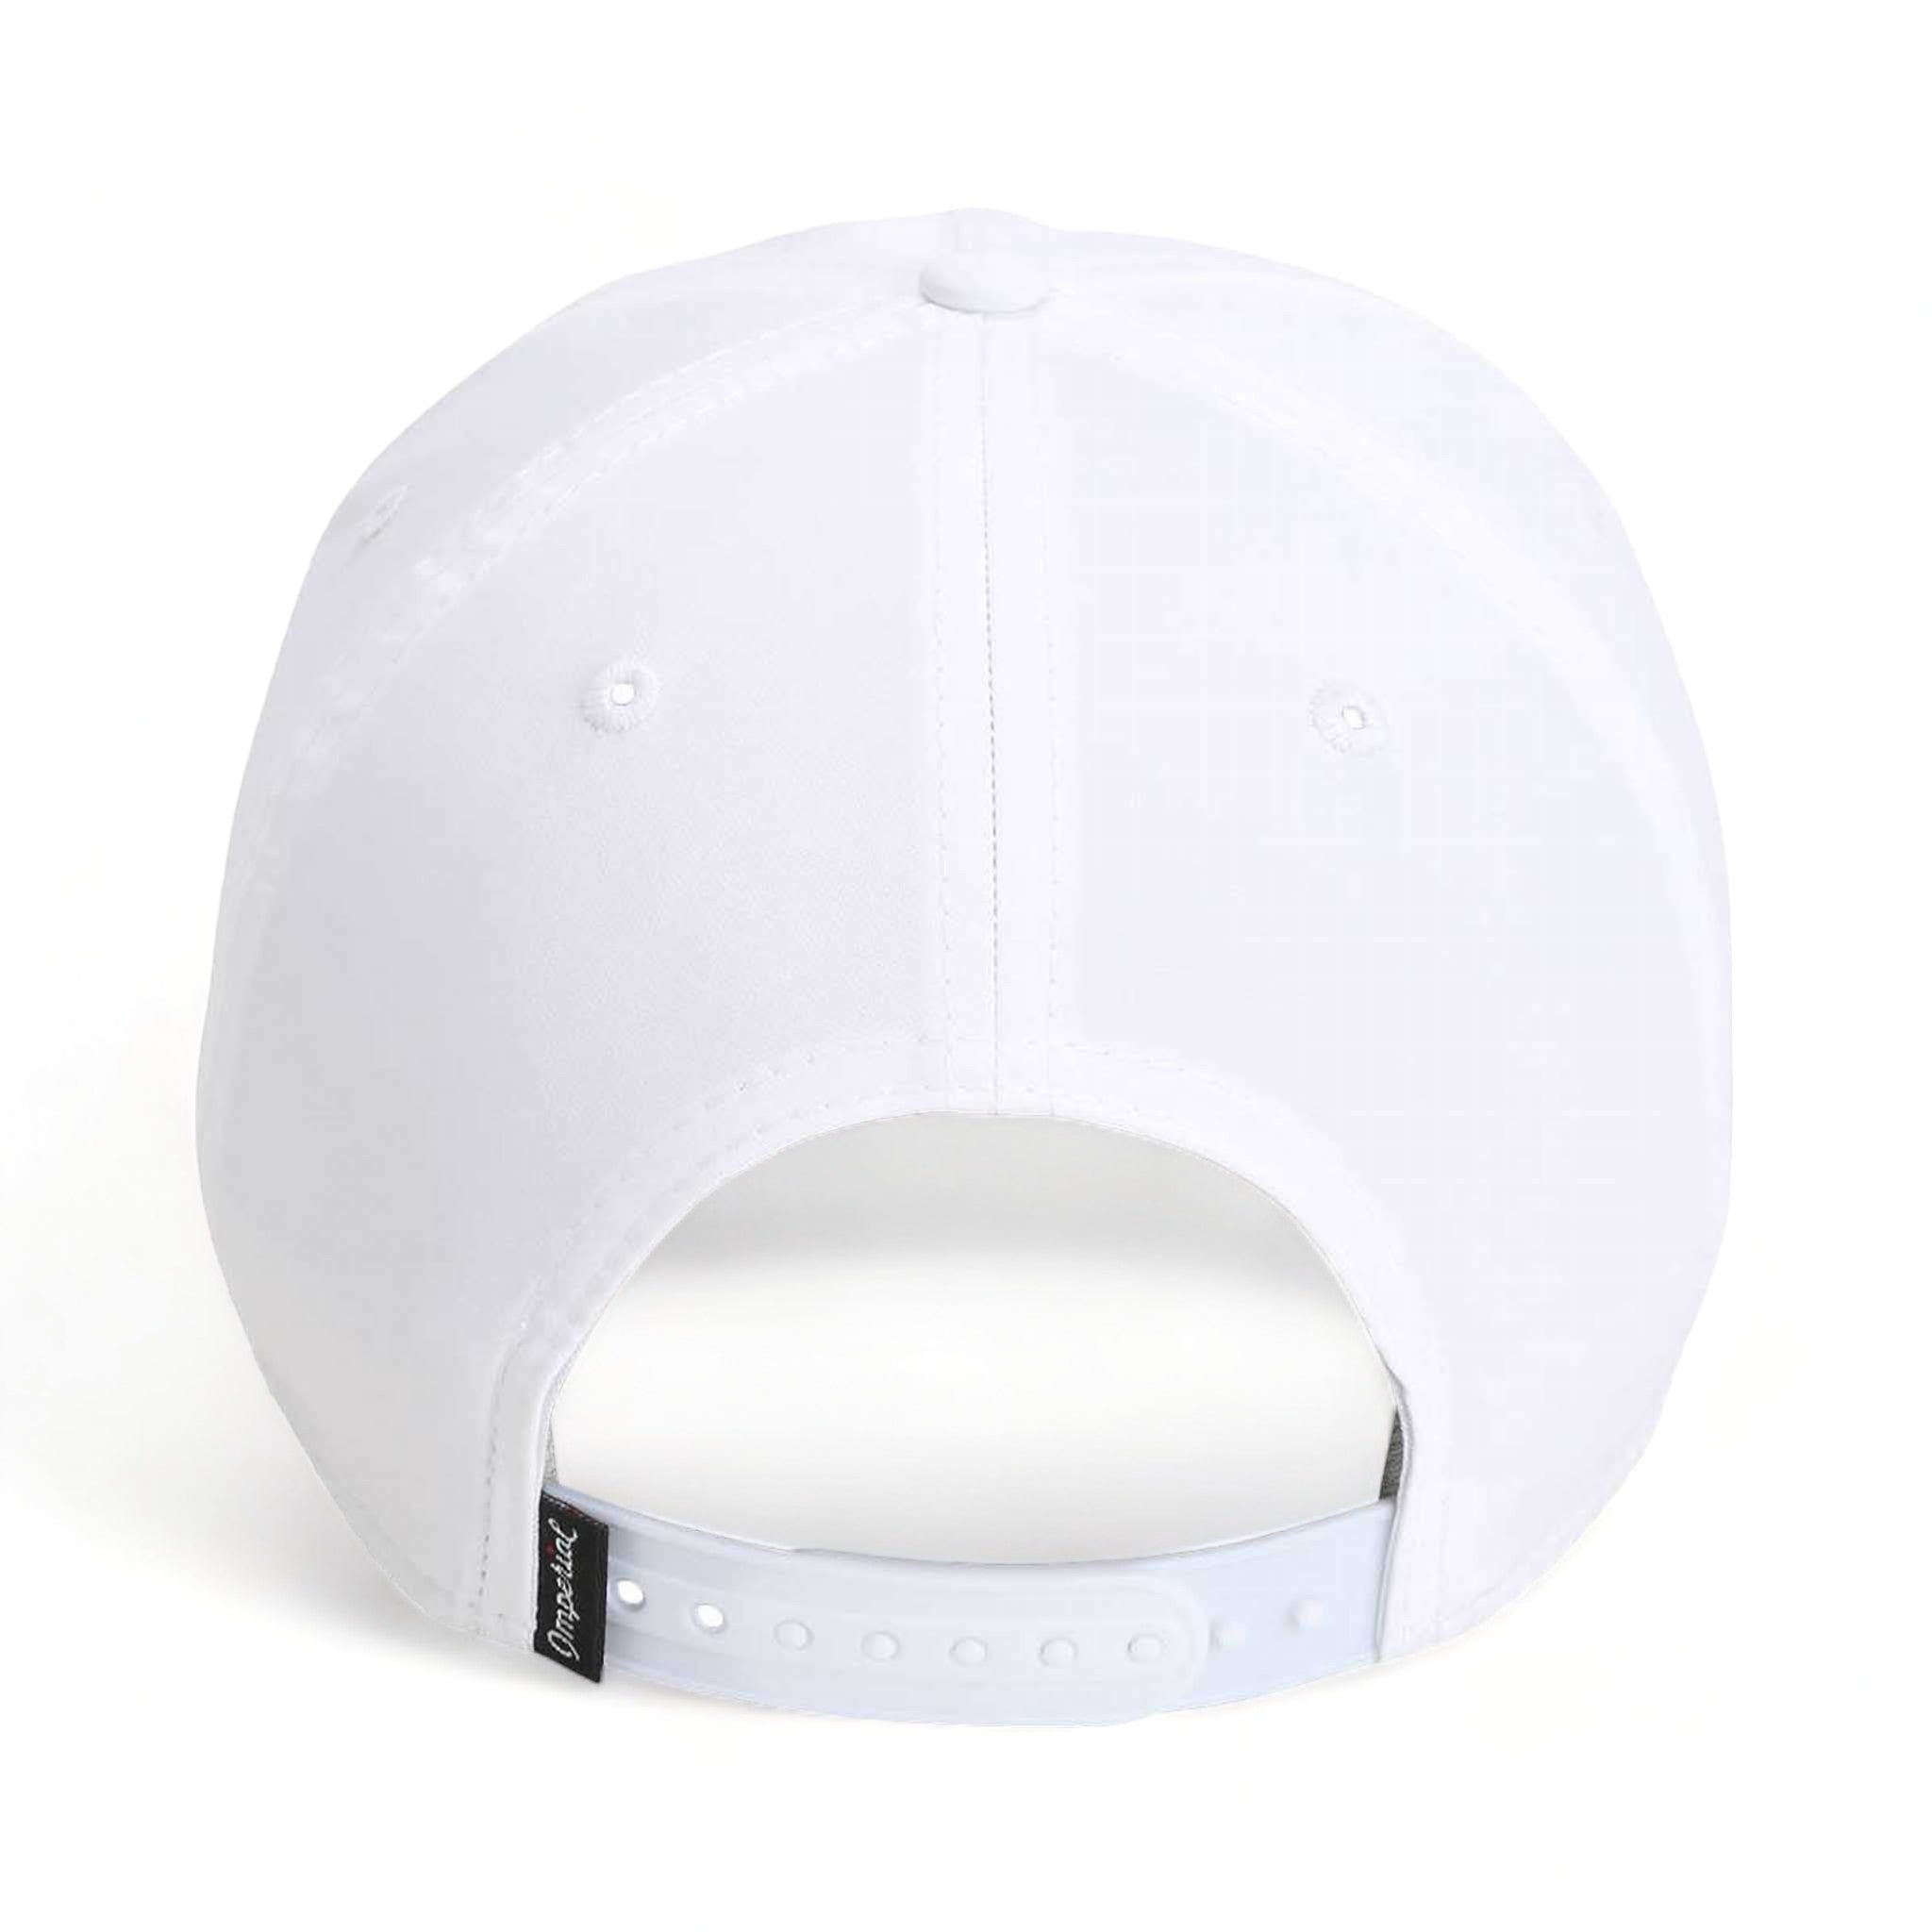 Back view of Imperial 5054 custom hat in white and white